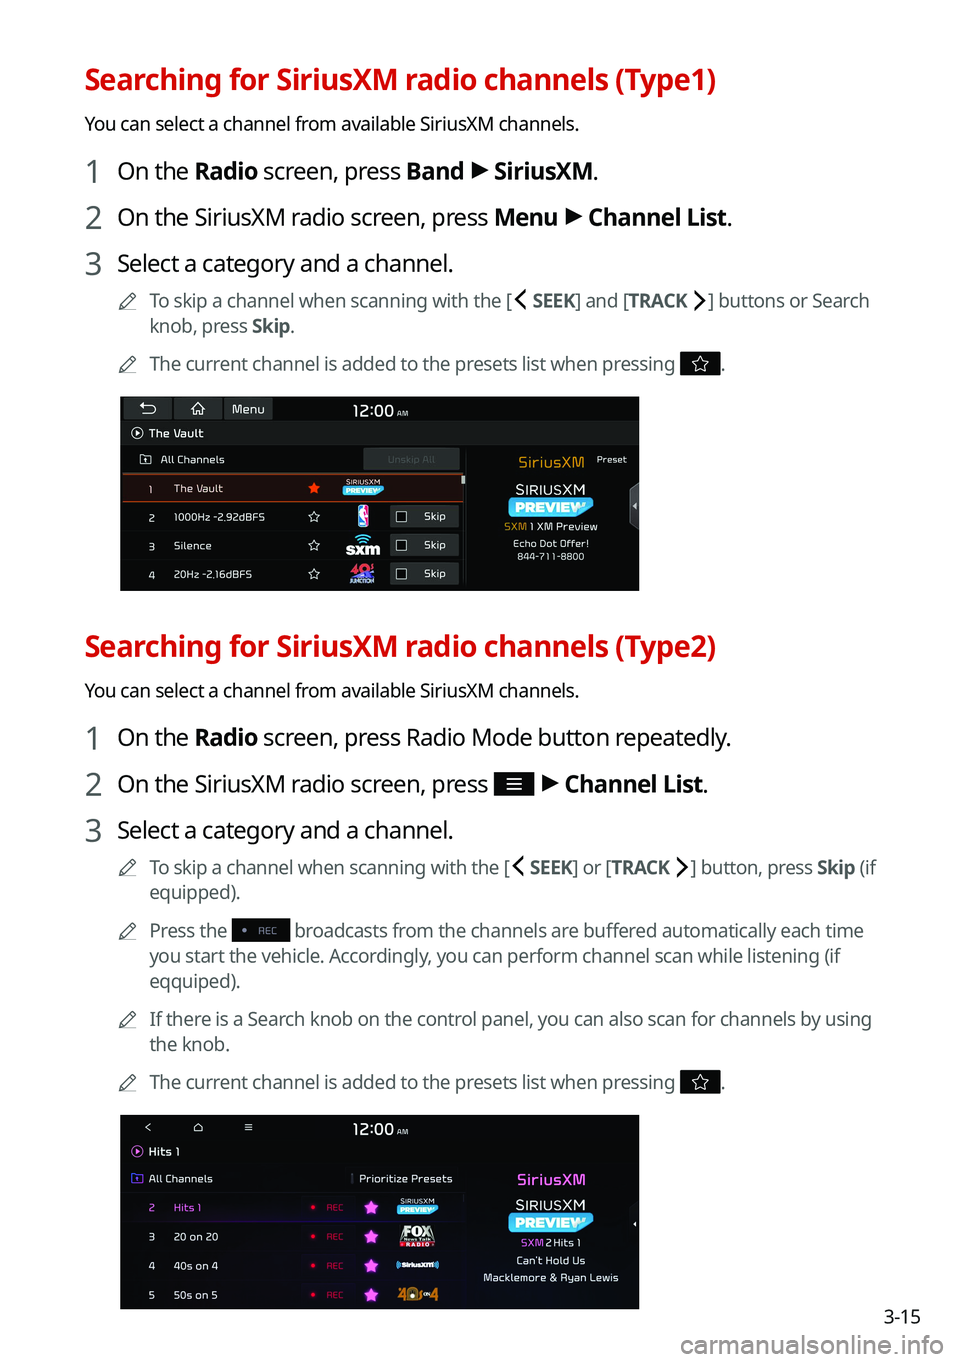 KIA SOUL 2022  Navigation System Quick Reference Guide 3-15
Searching for SiriusXM radio channels (Type1)
You can select a channel from available SiriusXM channels. 
1 On the Radio screen, press Band >
 SiriusXM.
2 On the SiriusXM radio screen, press Menu